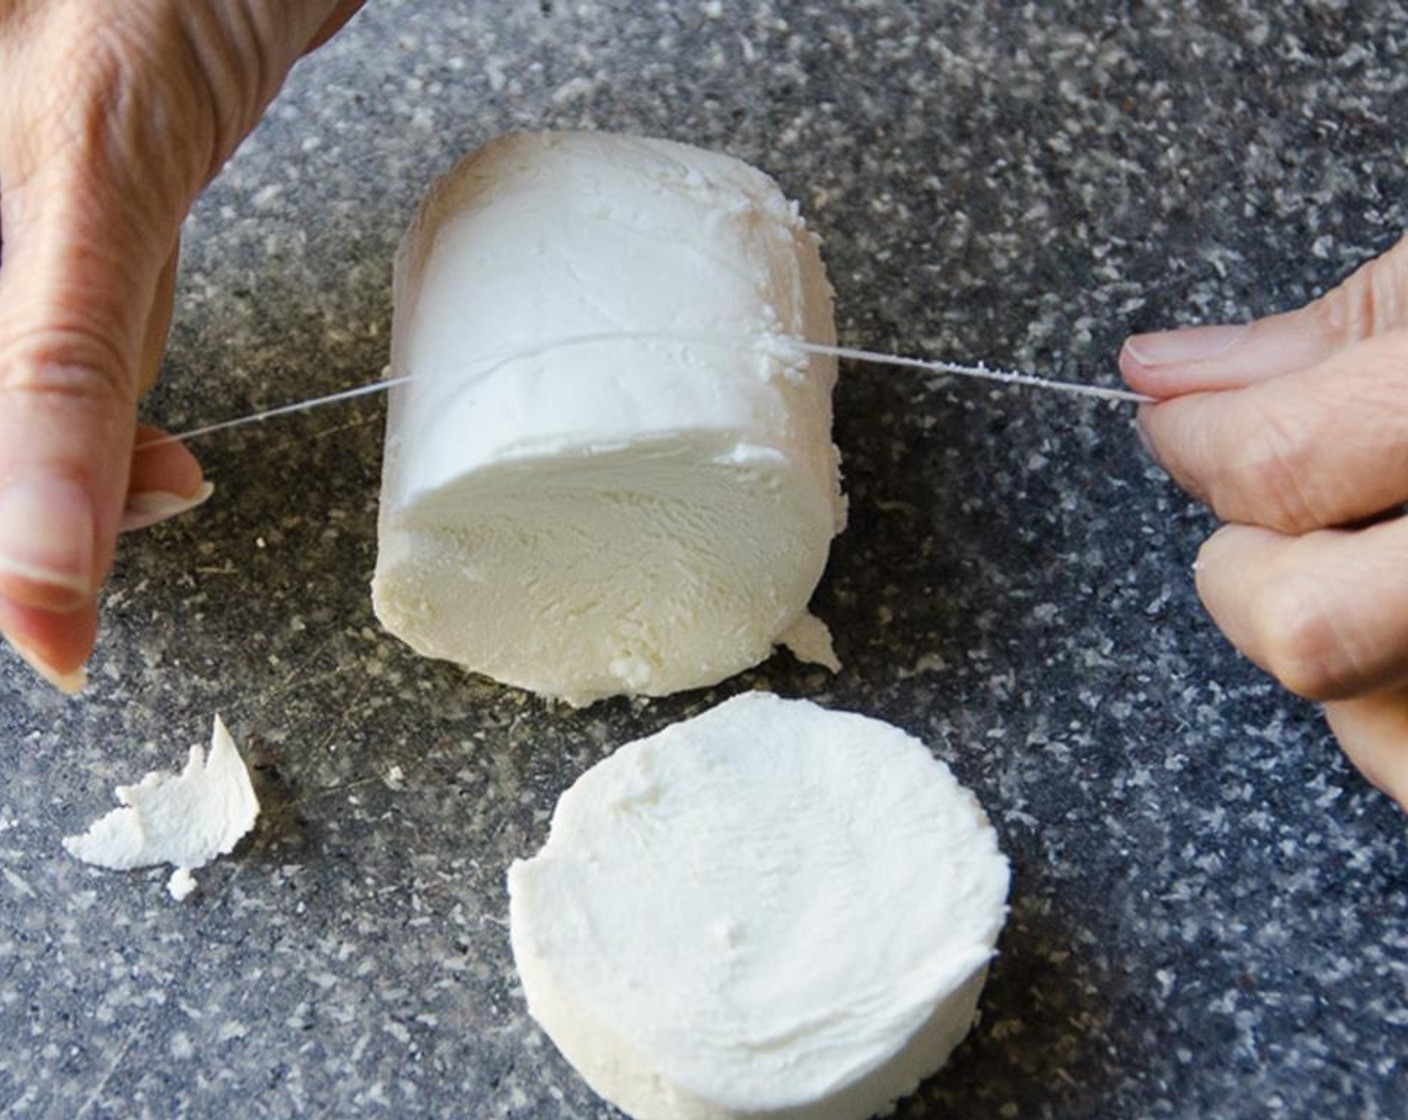 step 6 Slice the Goat Cheese (1/2 cup) with unwaxed, unflavored dental floss. Lay the floss flat on a cutting board. Place the goat cheese on top of the floss and cross the ends of the floss. Continue to pull the ends until it cuts off an even slice. Repeat with the remaining cheese.